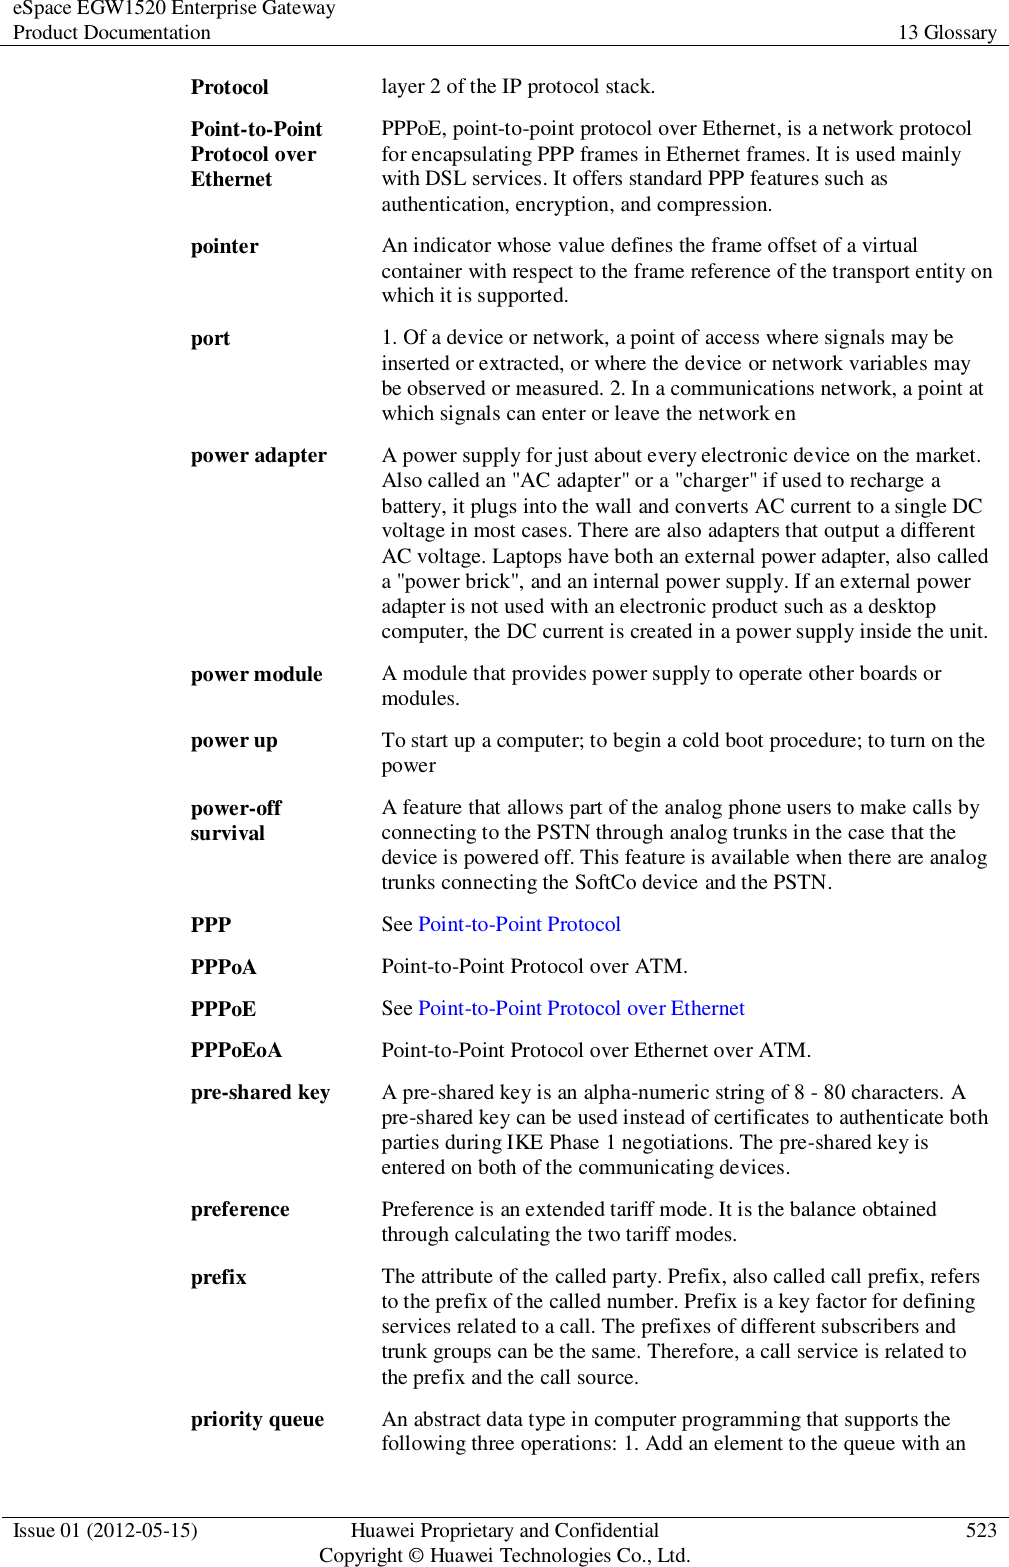 eSpace EGW1520 Enterprise Gateway Product Documentation 13 Glossary  Issue 01 (2012-05-15) Huawei Proprietary and Confidential                                     Copyright © Huawei Technologies Co., Ltd. 523  Protocol layer 2 of the IP protocol stack. Point-to-Point Protocol over Ethernet PPPoE, point-to-point protocol over Ethernet, is a network protocol for encapsulating PPP frames in Ethernet frames. It is used mainly with DSL services. It offers standard PPP features such as authentication, encryption, and compression. pointer An indicator whose value defines the frame offset of a virtual container with respect to the frame reference of the transport entity on which it is supported. port 1. Of a device or network, a point of access where signals may be inserted or extracted, or where the device or network variables may be observed or measured. 2. In a communications network, a point at which signals can enter or leave the network en power adapter A power supply for just about every electronic device on the market. Also called an &quot;AC adapter&quot; or a &quot;charger&quot; if used to recharge a battery, it plugs into the wall and converts AC current to a single DC voltage in most cases. There are also adapters that output a different AC voltage. Laptops have both an external power adapter, also called a &quot;power brick&quot;, and an internal power supply. If an external power adapter is not used with an electronic product such as a desktop computer, the DC current is created in a power supply inside the unit. power module A module that provides power supply to operate other boards or modules. power up To start up a computer; to begin a cold boot procedure; to turn on the power power-off survival A feature that allows part of the analog phone users to make calls by connecting to the PSTN through analog trunks in the case that the device is powered off. This feature is available when there are analog trunks connecting the SoftCo device and the PSTN. PPP See Point-to-Point Protocol PPPoA Point-to-Point Protocol over ATM. PPPoE See Point-to-Point Protocol over Ethernet PPPoEoA Point-to-Point Protocol over Ethernet over ATM. pre-shared key A pre-shared key is an alpha-numeric string of 8 - 80 characters. A pre-shared key can be used instead of certificates to authenticate both parties during IKE Phase 1 negotiations. The pre-shared key is entered on both of the communicating devices. preference Preference is an extended tariff mode. It is the balance obtained through calculating the two tariff modes. prefix The attribute of the called party. Prefix, also called call prefix, refers to the prefix of the called number. Prefix is a key factor for defining services related to a call. The prefixes of different subscribers and trunk groups can be the same. Therefore, a call service is related to the prefix and the call source. priority queue An abstract data type in computer programming that supports the following three operations: 1. Add an element to the queue with an 